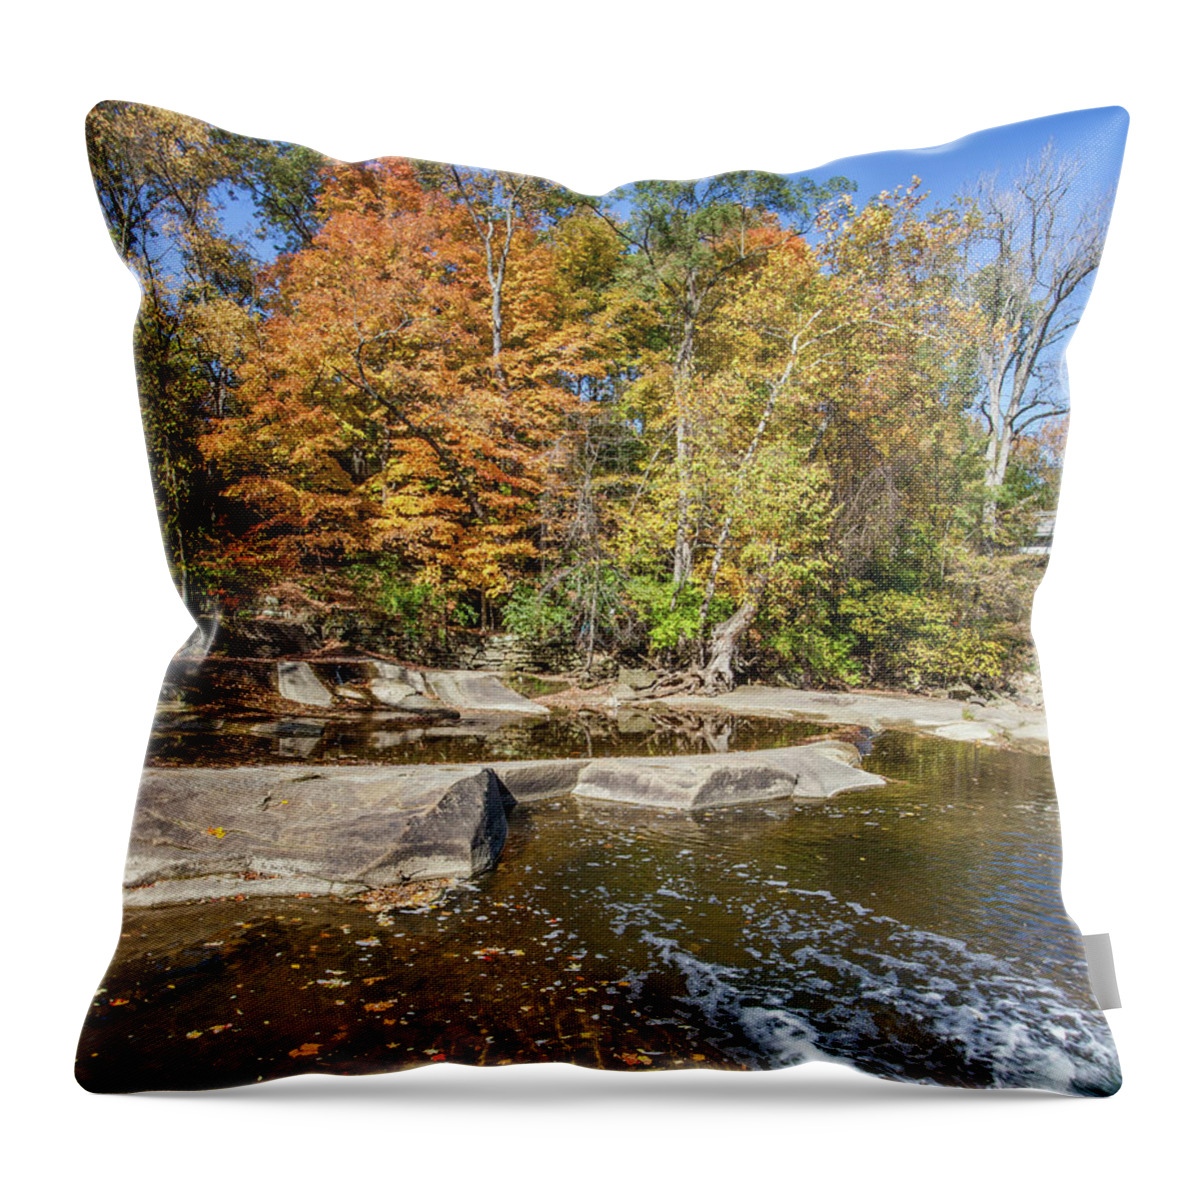 Autumn Splendor Throw Pillow featuring the photograph Olmsted Falls Autumn Spendor by Lon Dittrick